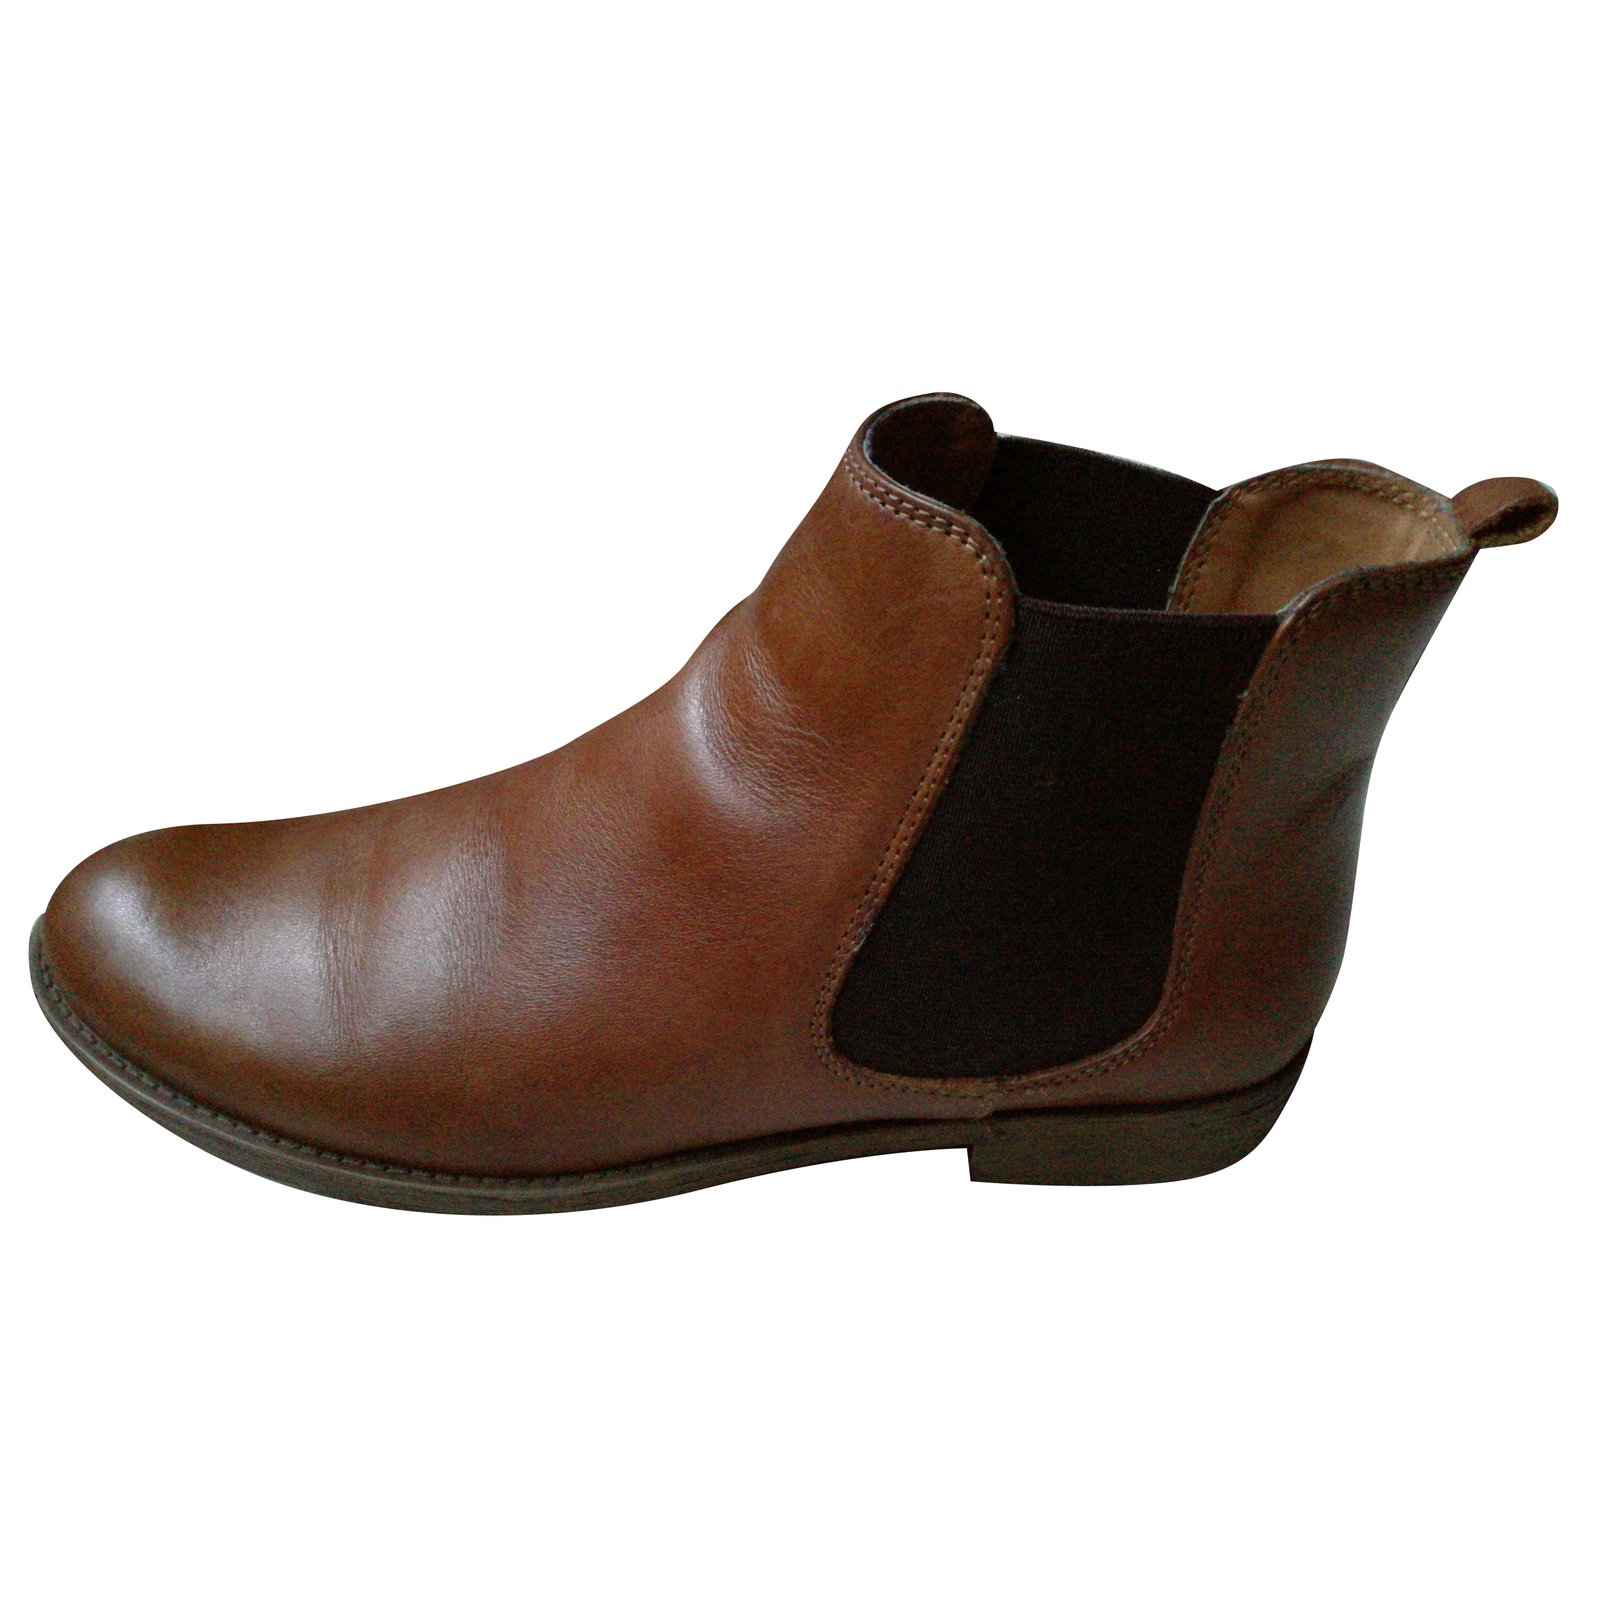 dune ankle boots